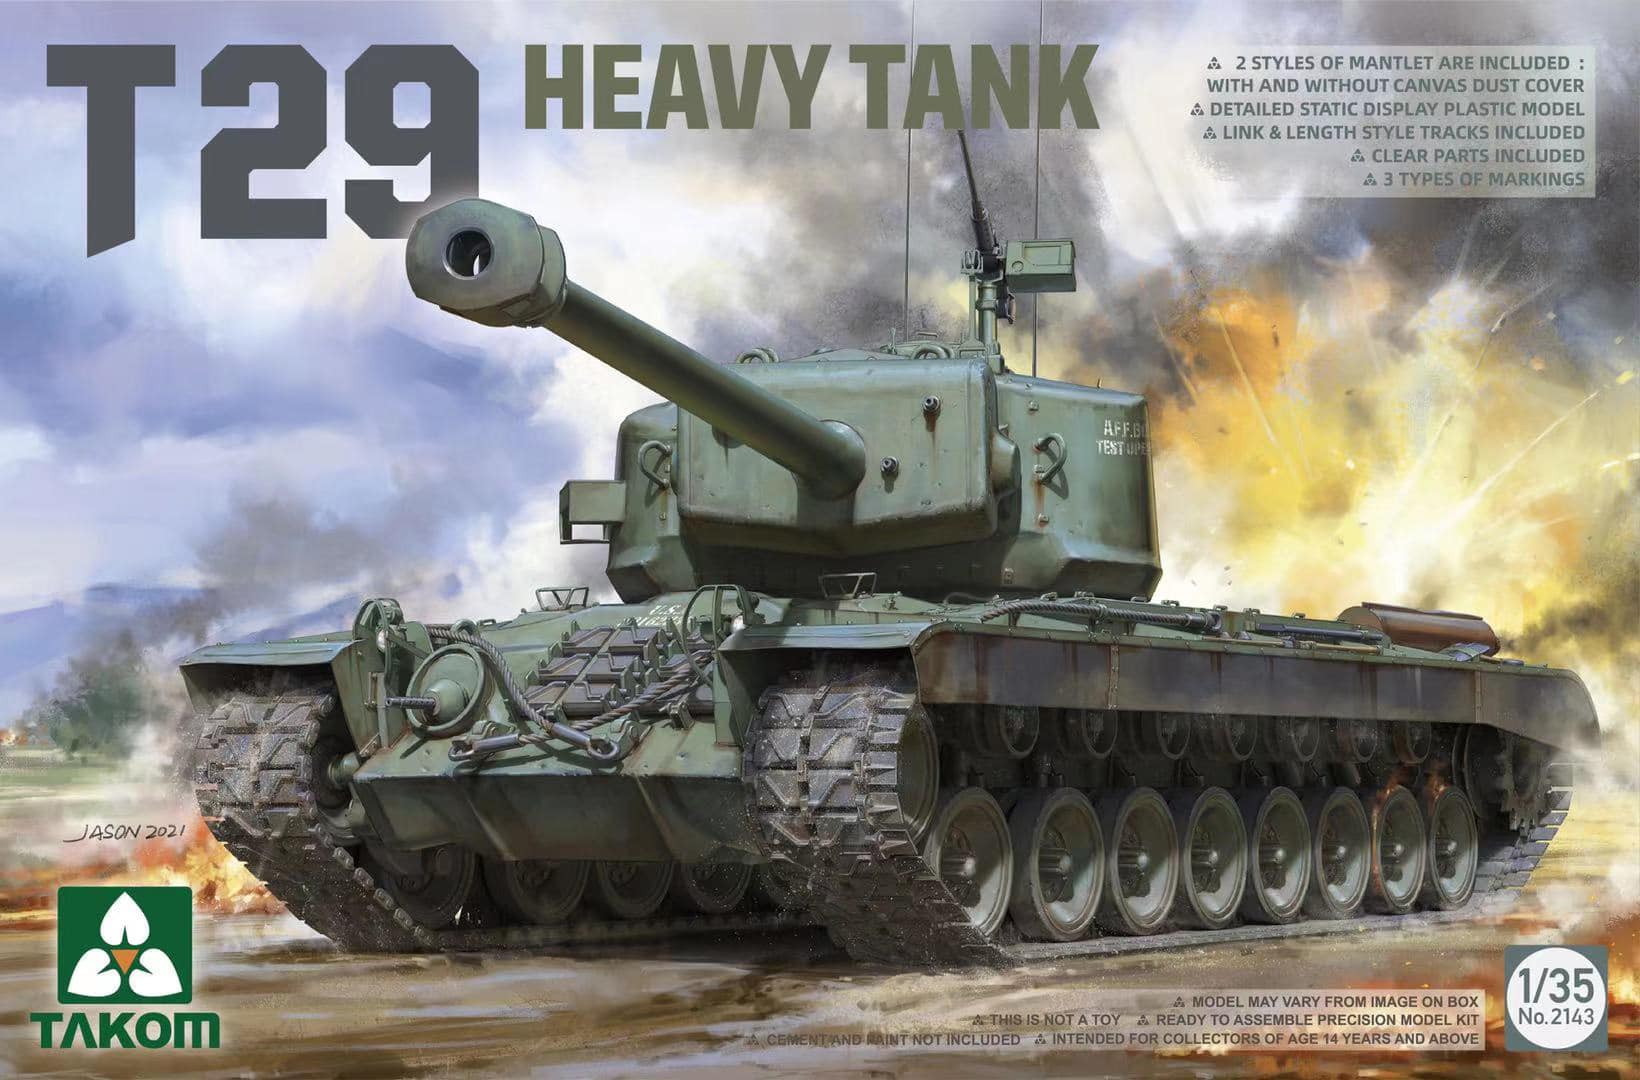 The Modelling News: Construction review: T29 Heavy Tank from Takom 1/35th  scale